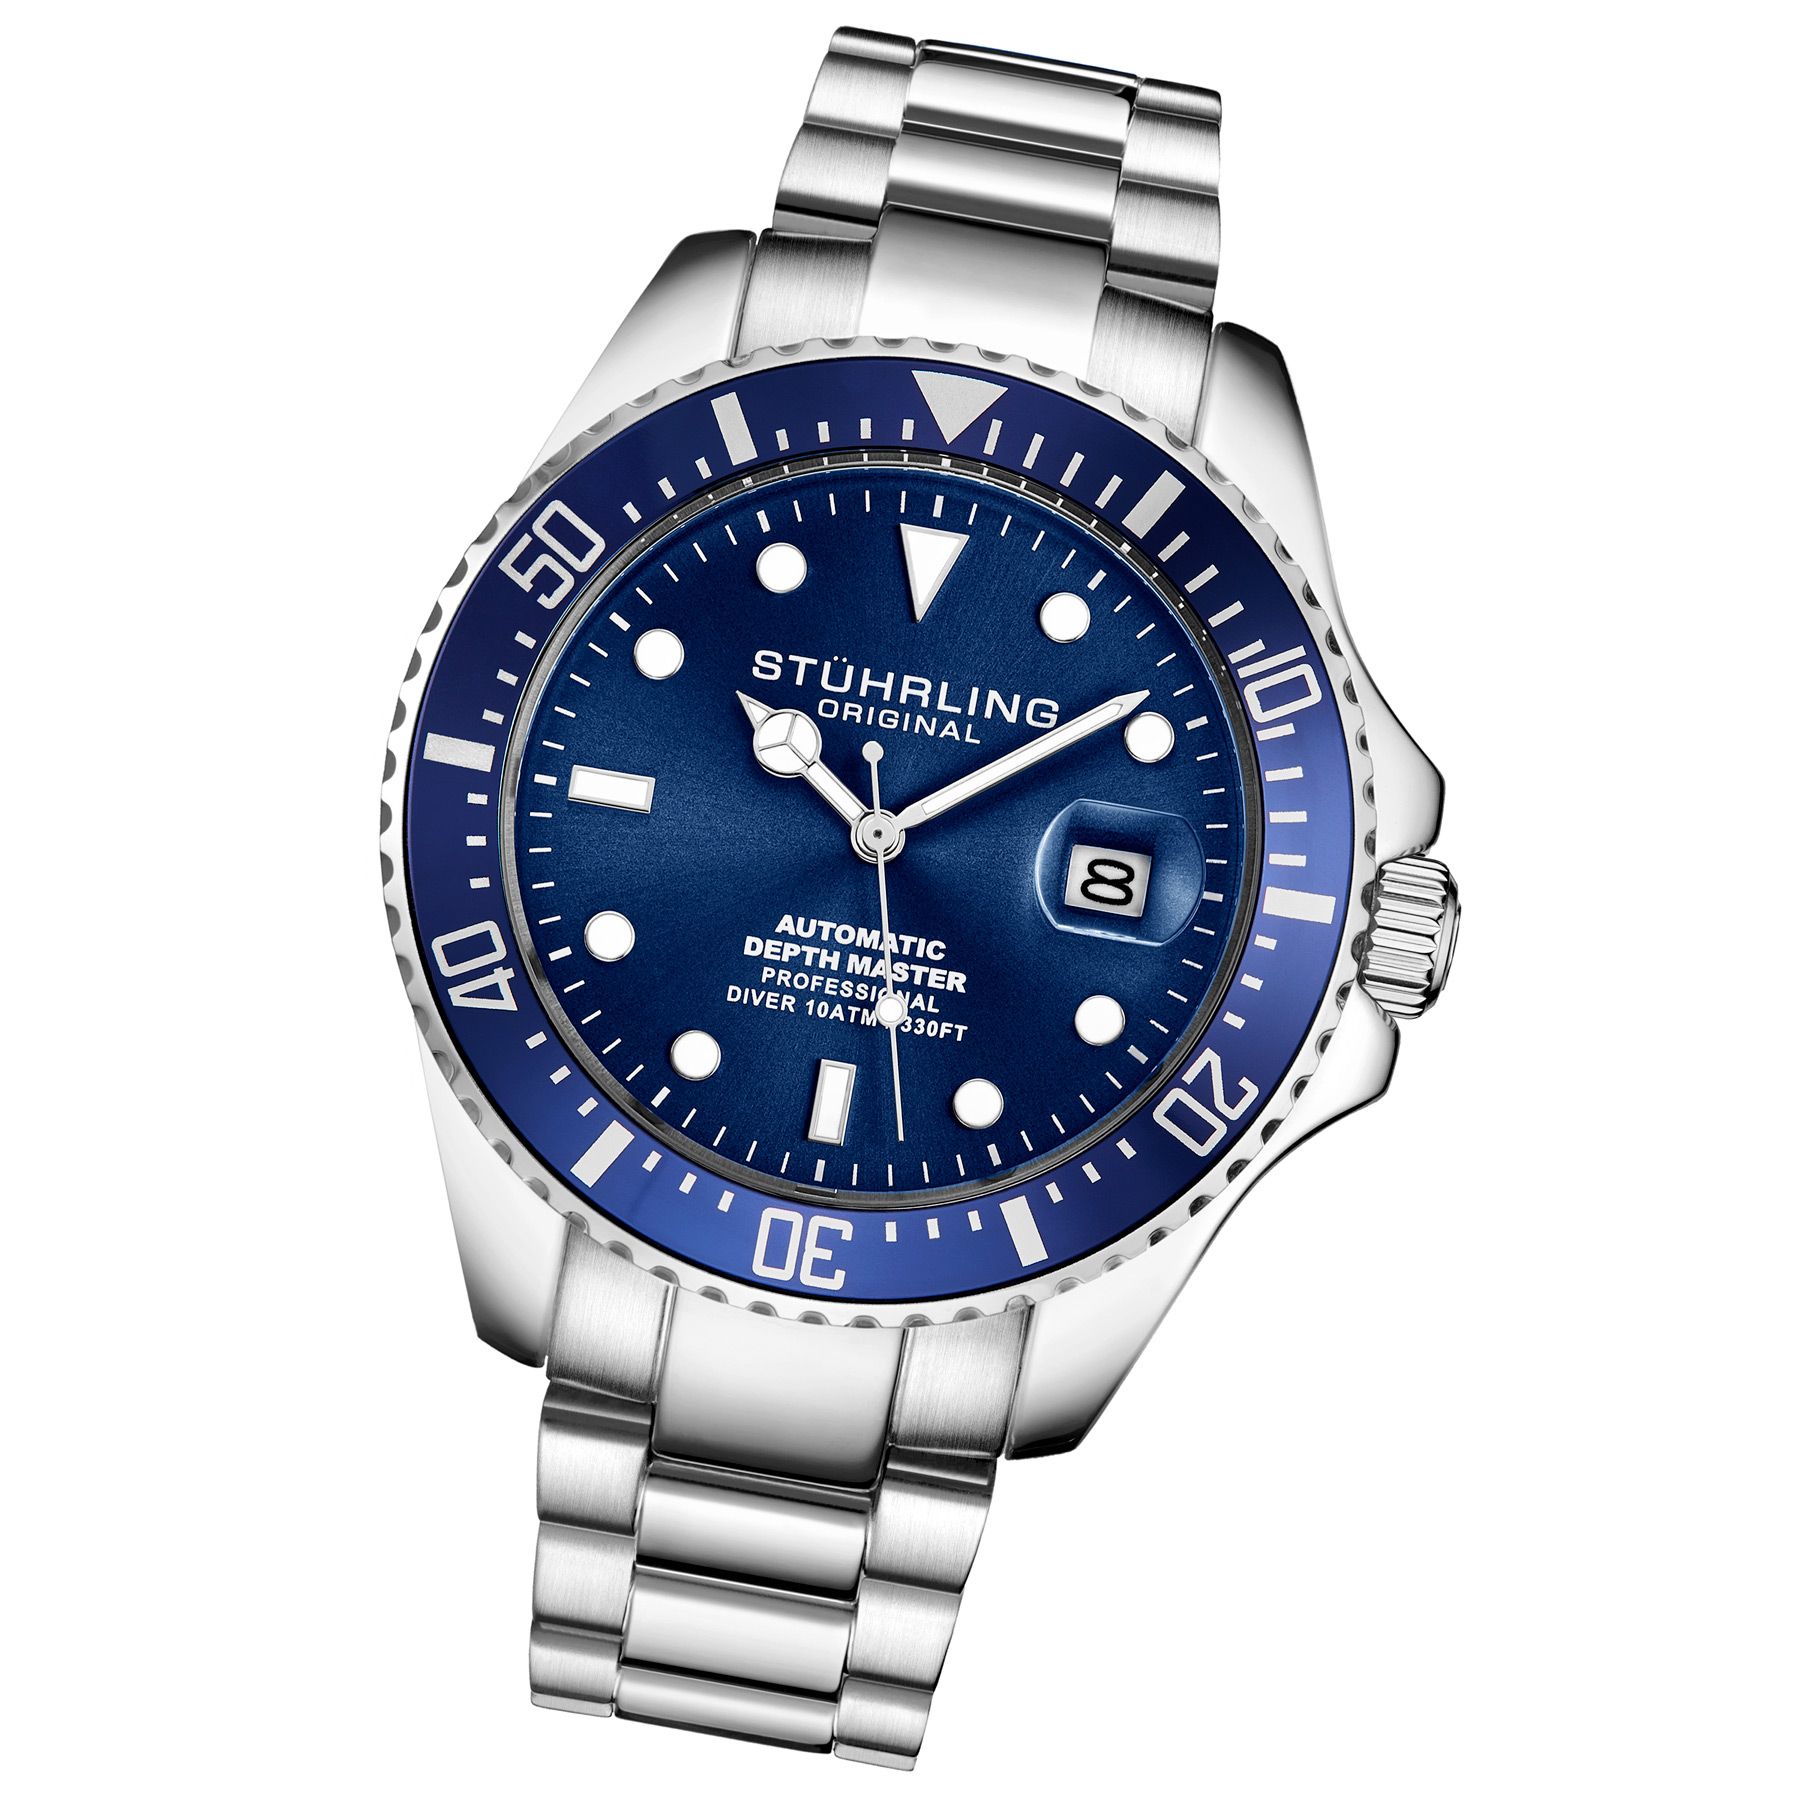 Men's Automatic Diver Watch, Silver Case, Blue Dial, Silver Stainless Steel Bracelet